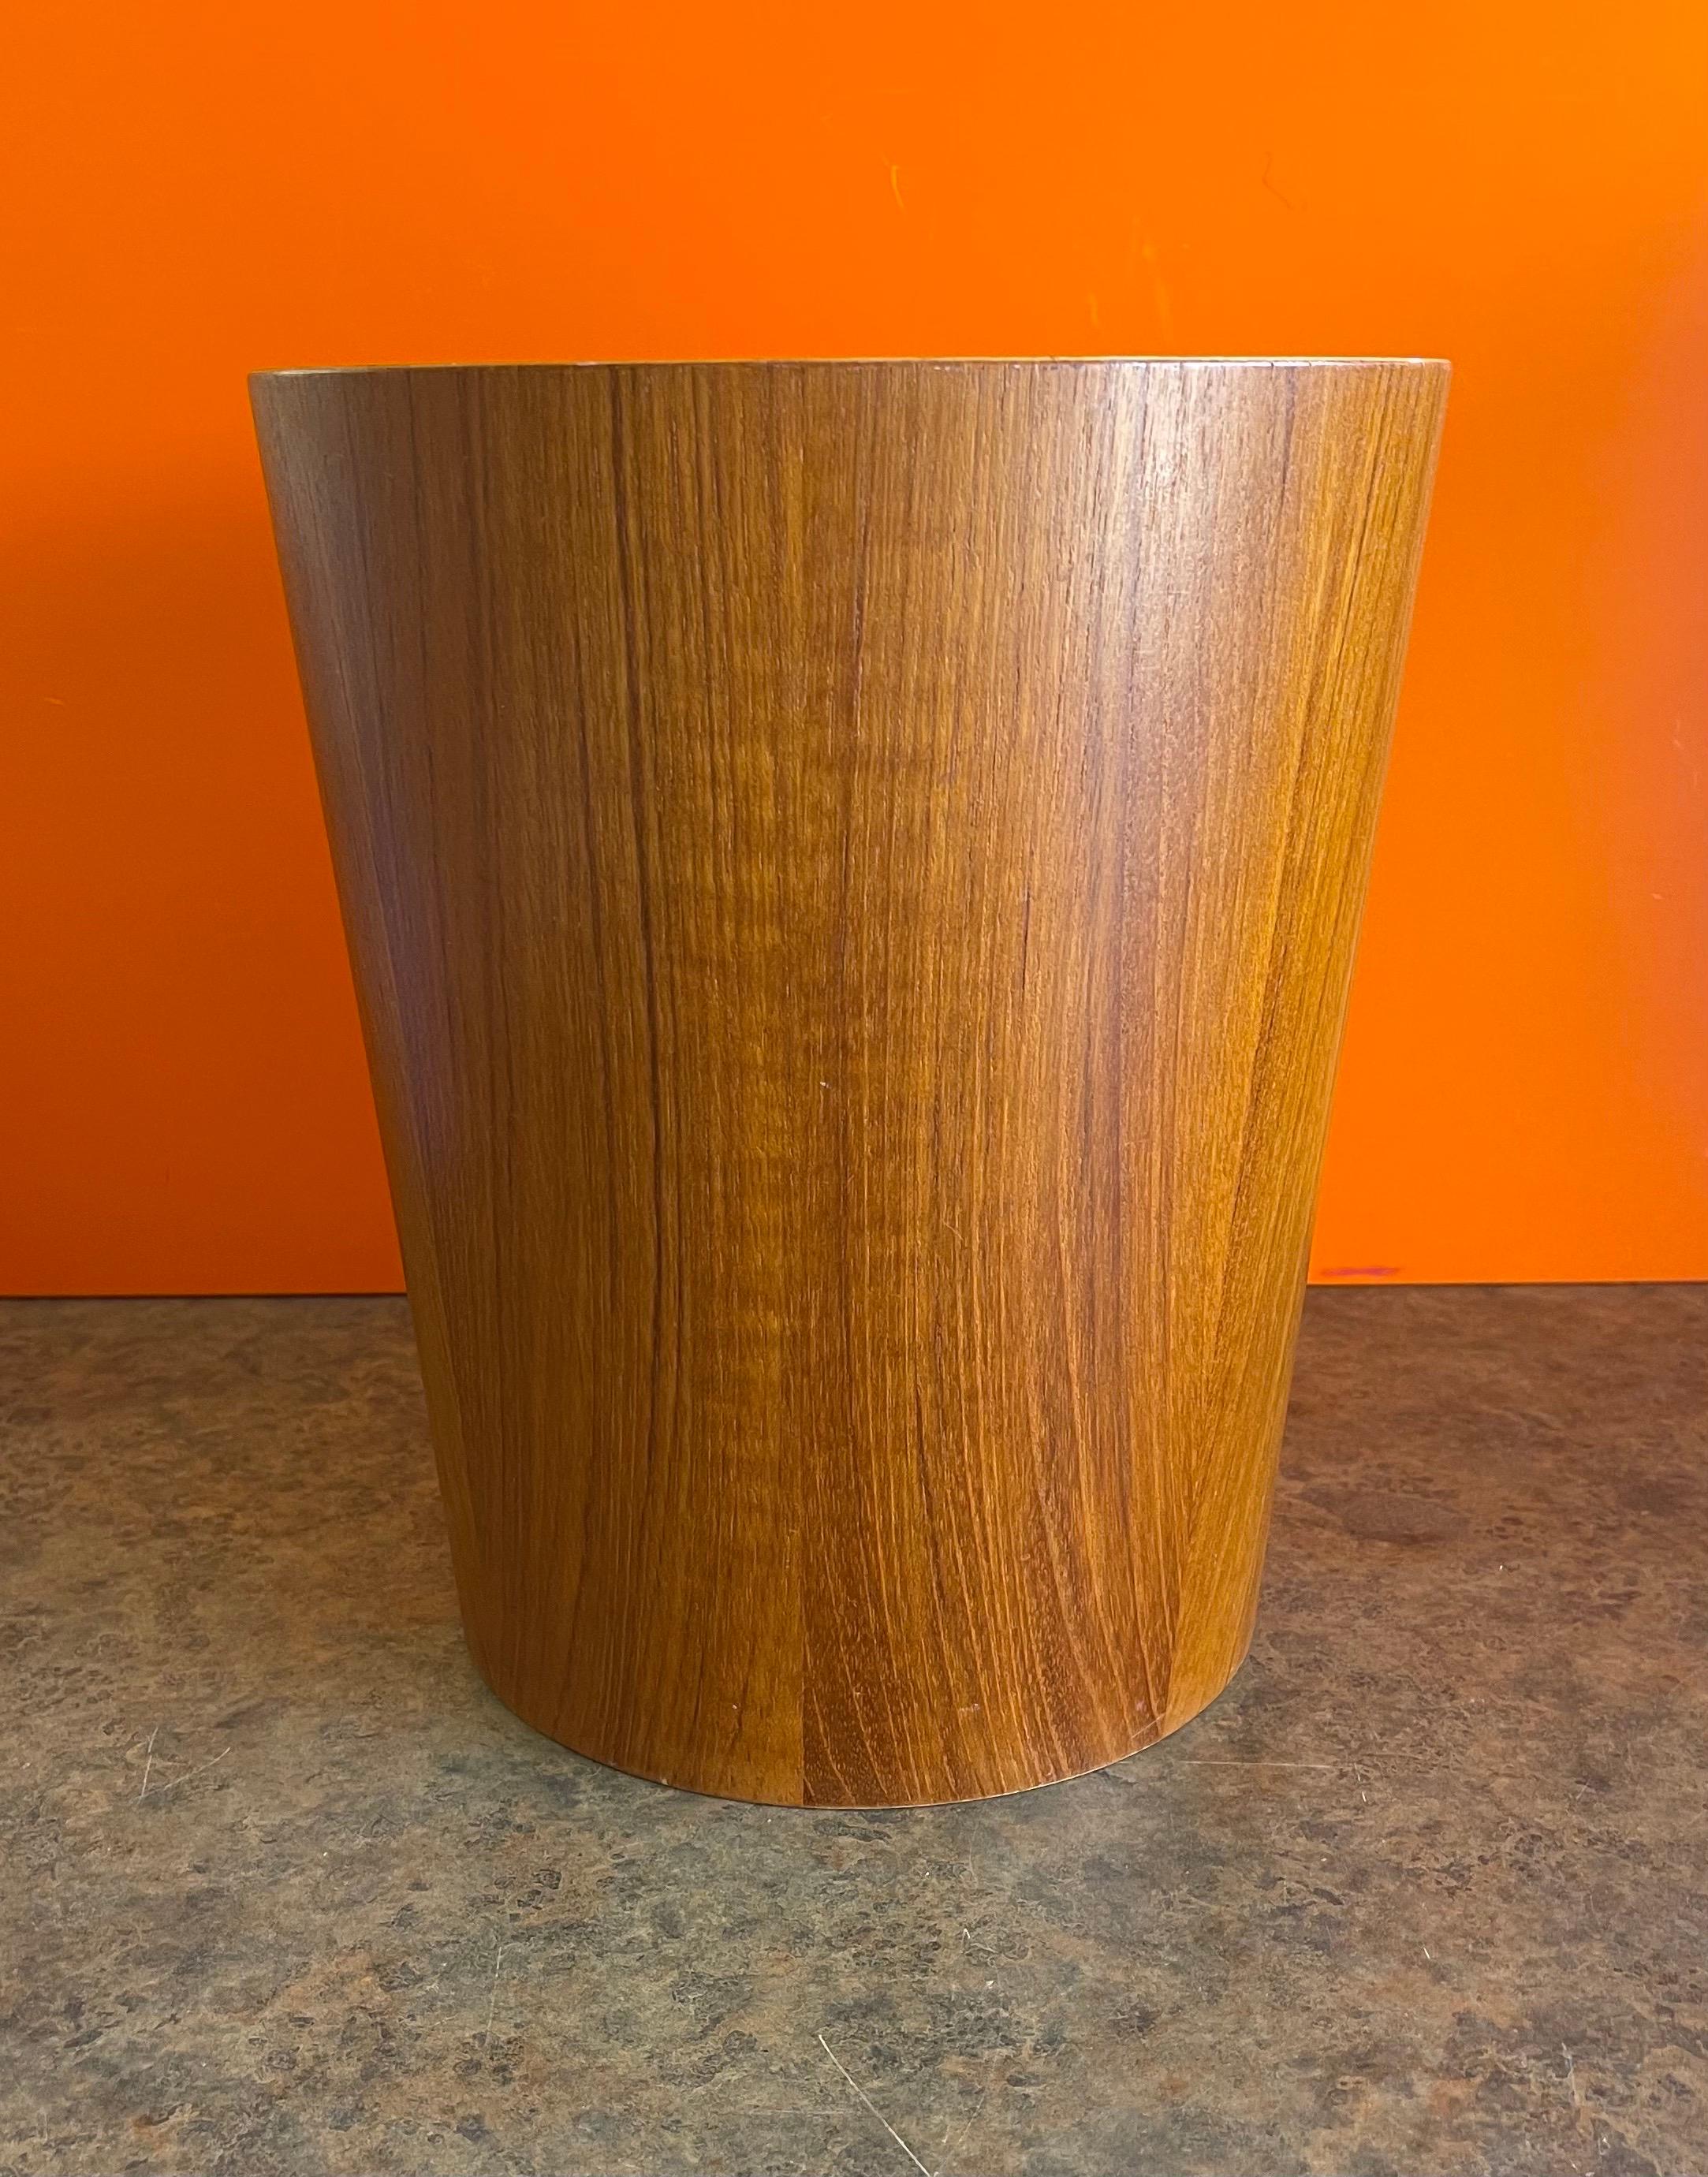 A beautiful Mid-Century Modern Scandinavian teak waste paper basket by Martin Aberg for Servex House of Rainbow Wood Products, circa 1970s. The piece is made in Sweden and in very good vintage condition. The waste basket is 11